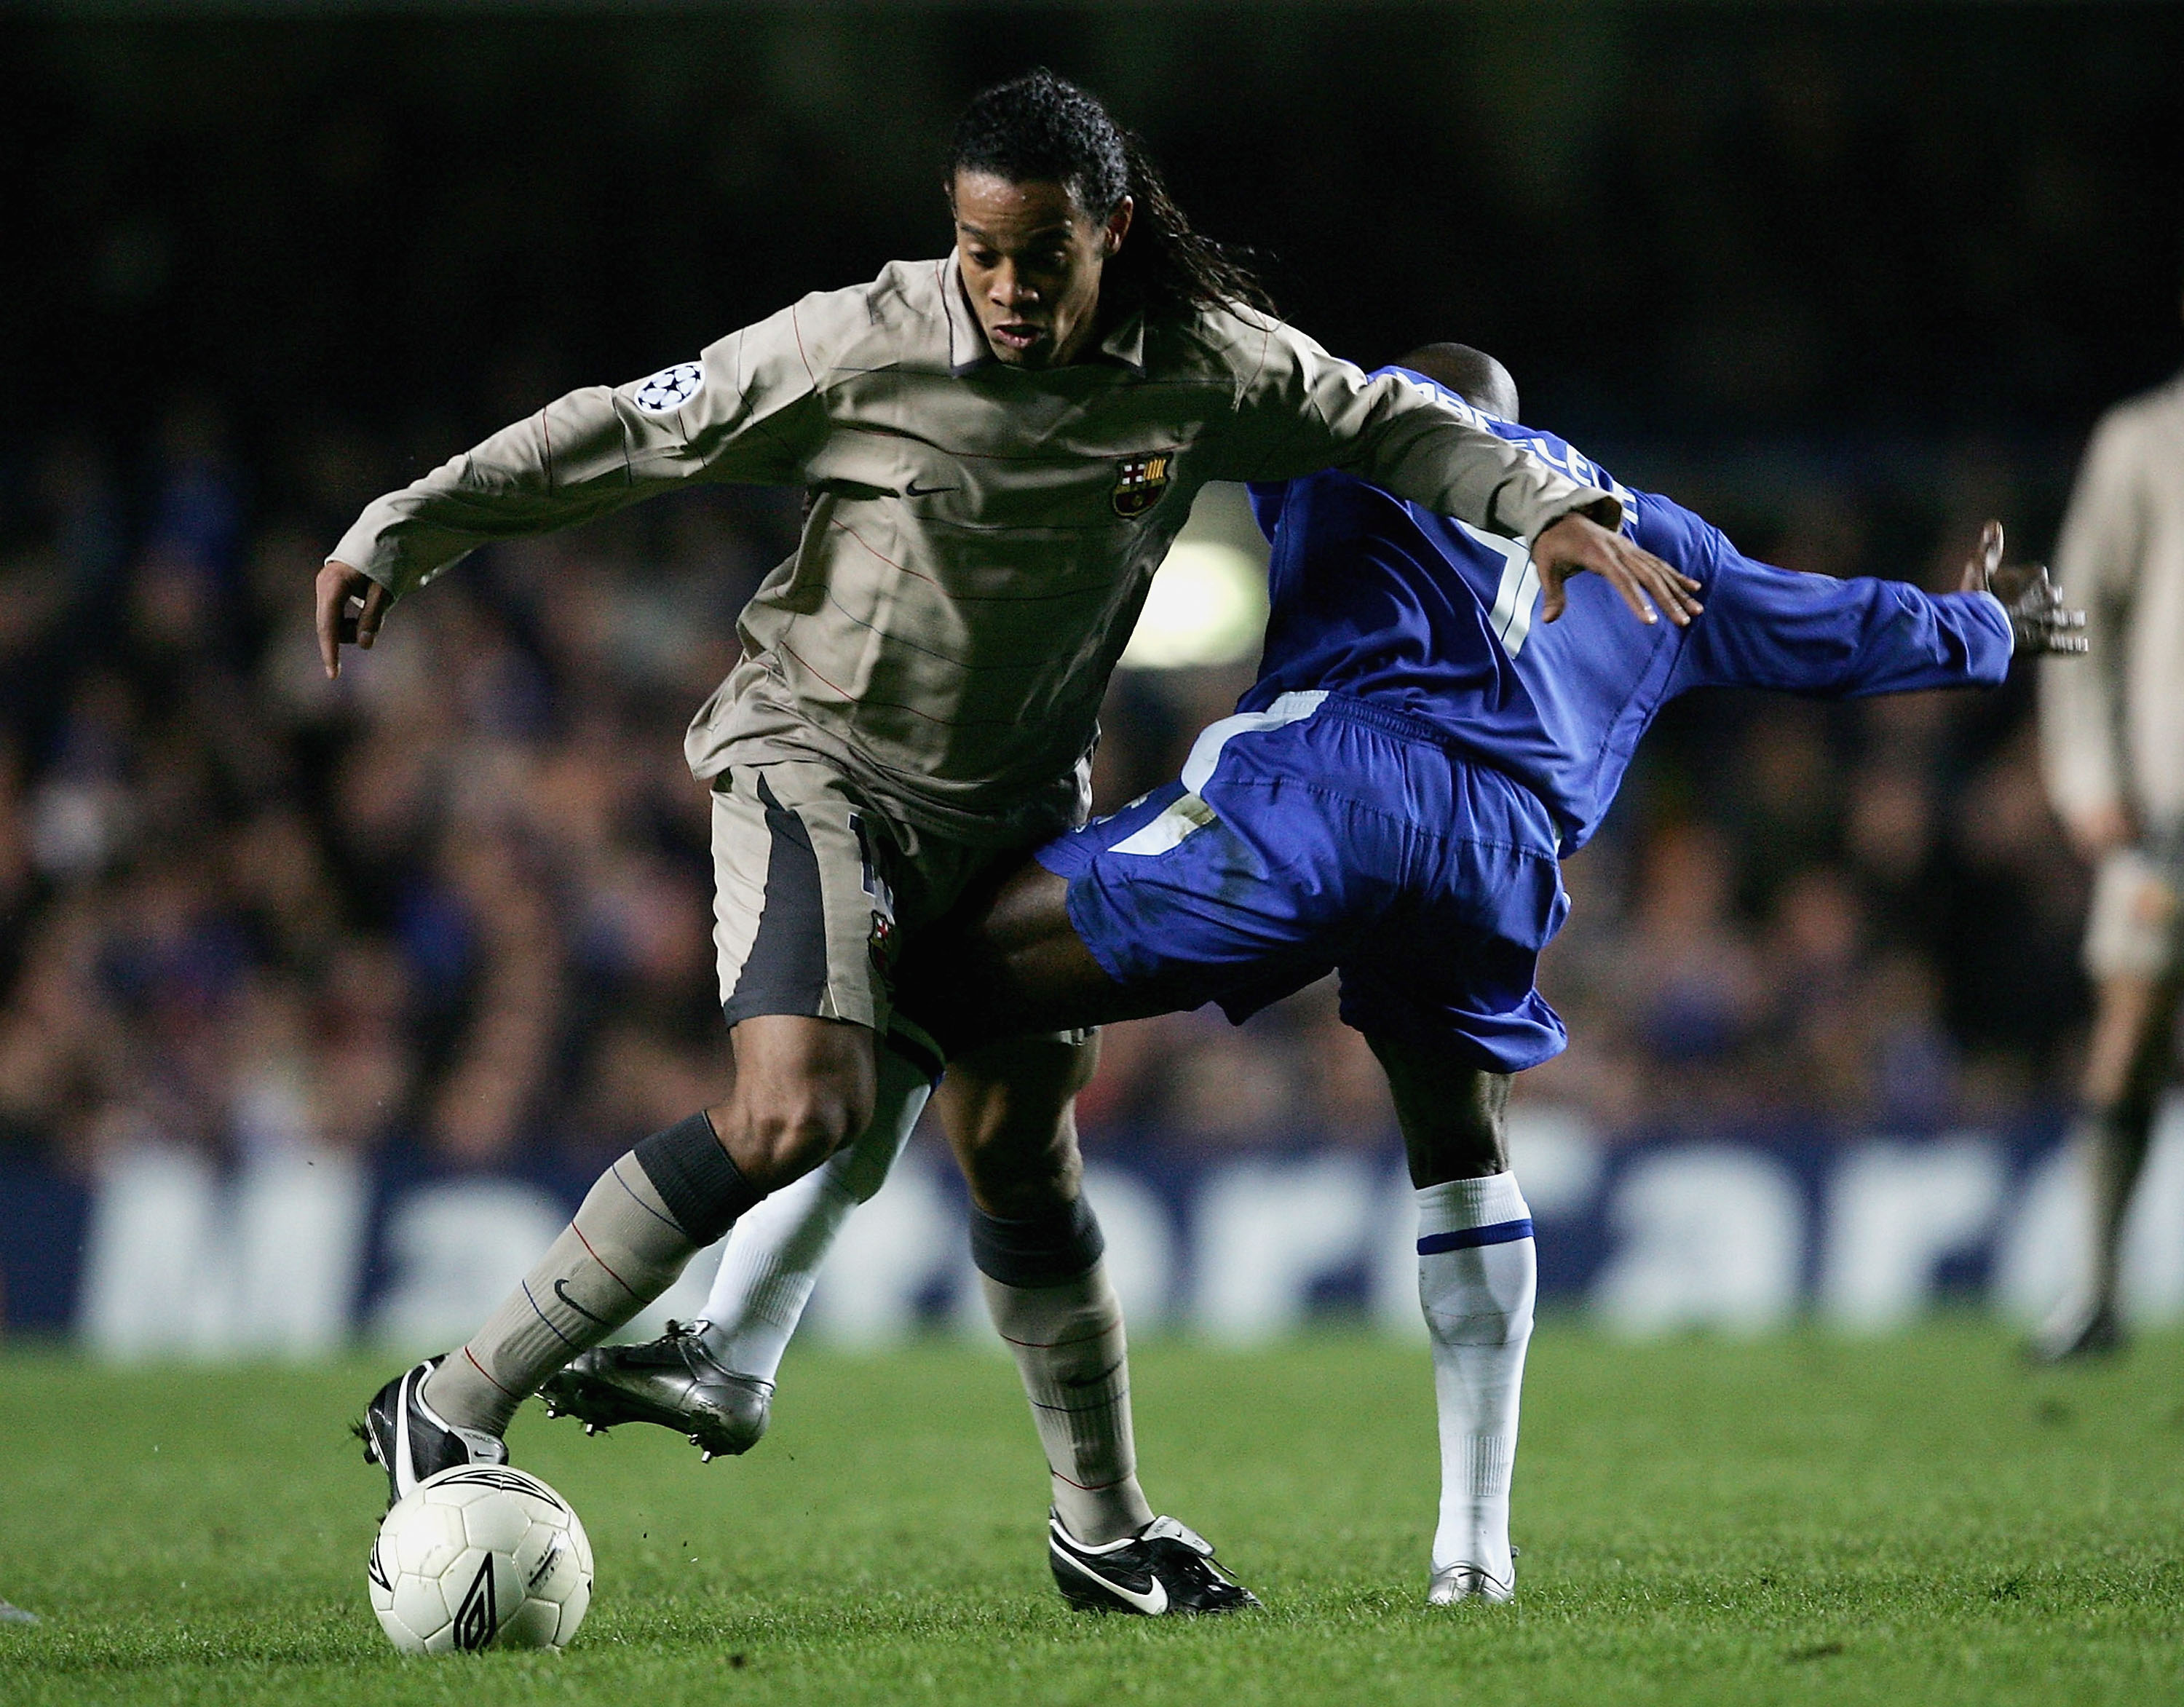 LONDON - MARCH 8: Ronaldinho of Barcelona battles with Claude Makelele of Chelsea during the UEFA Champions League, First Knockout Round, Second Leg match between Chelsea and Barcelona at Stamford Bridge on March 8, 2005 in London, England.  (Photo by Sha